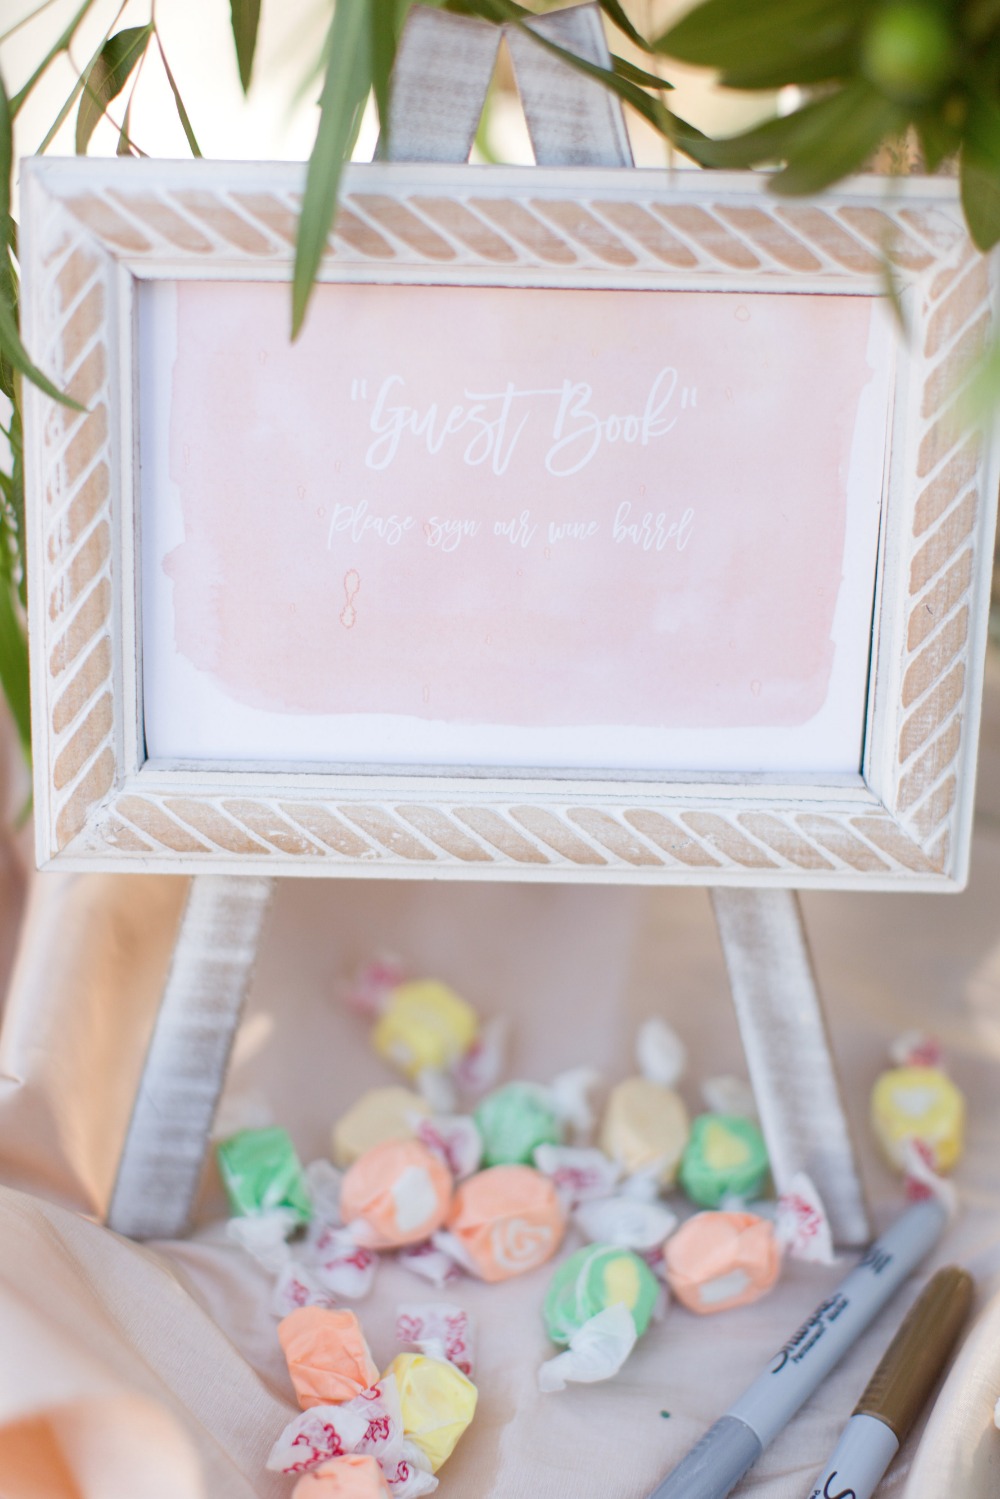 Candy guestbook